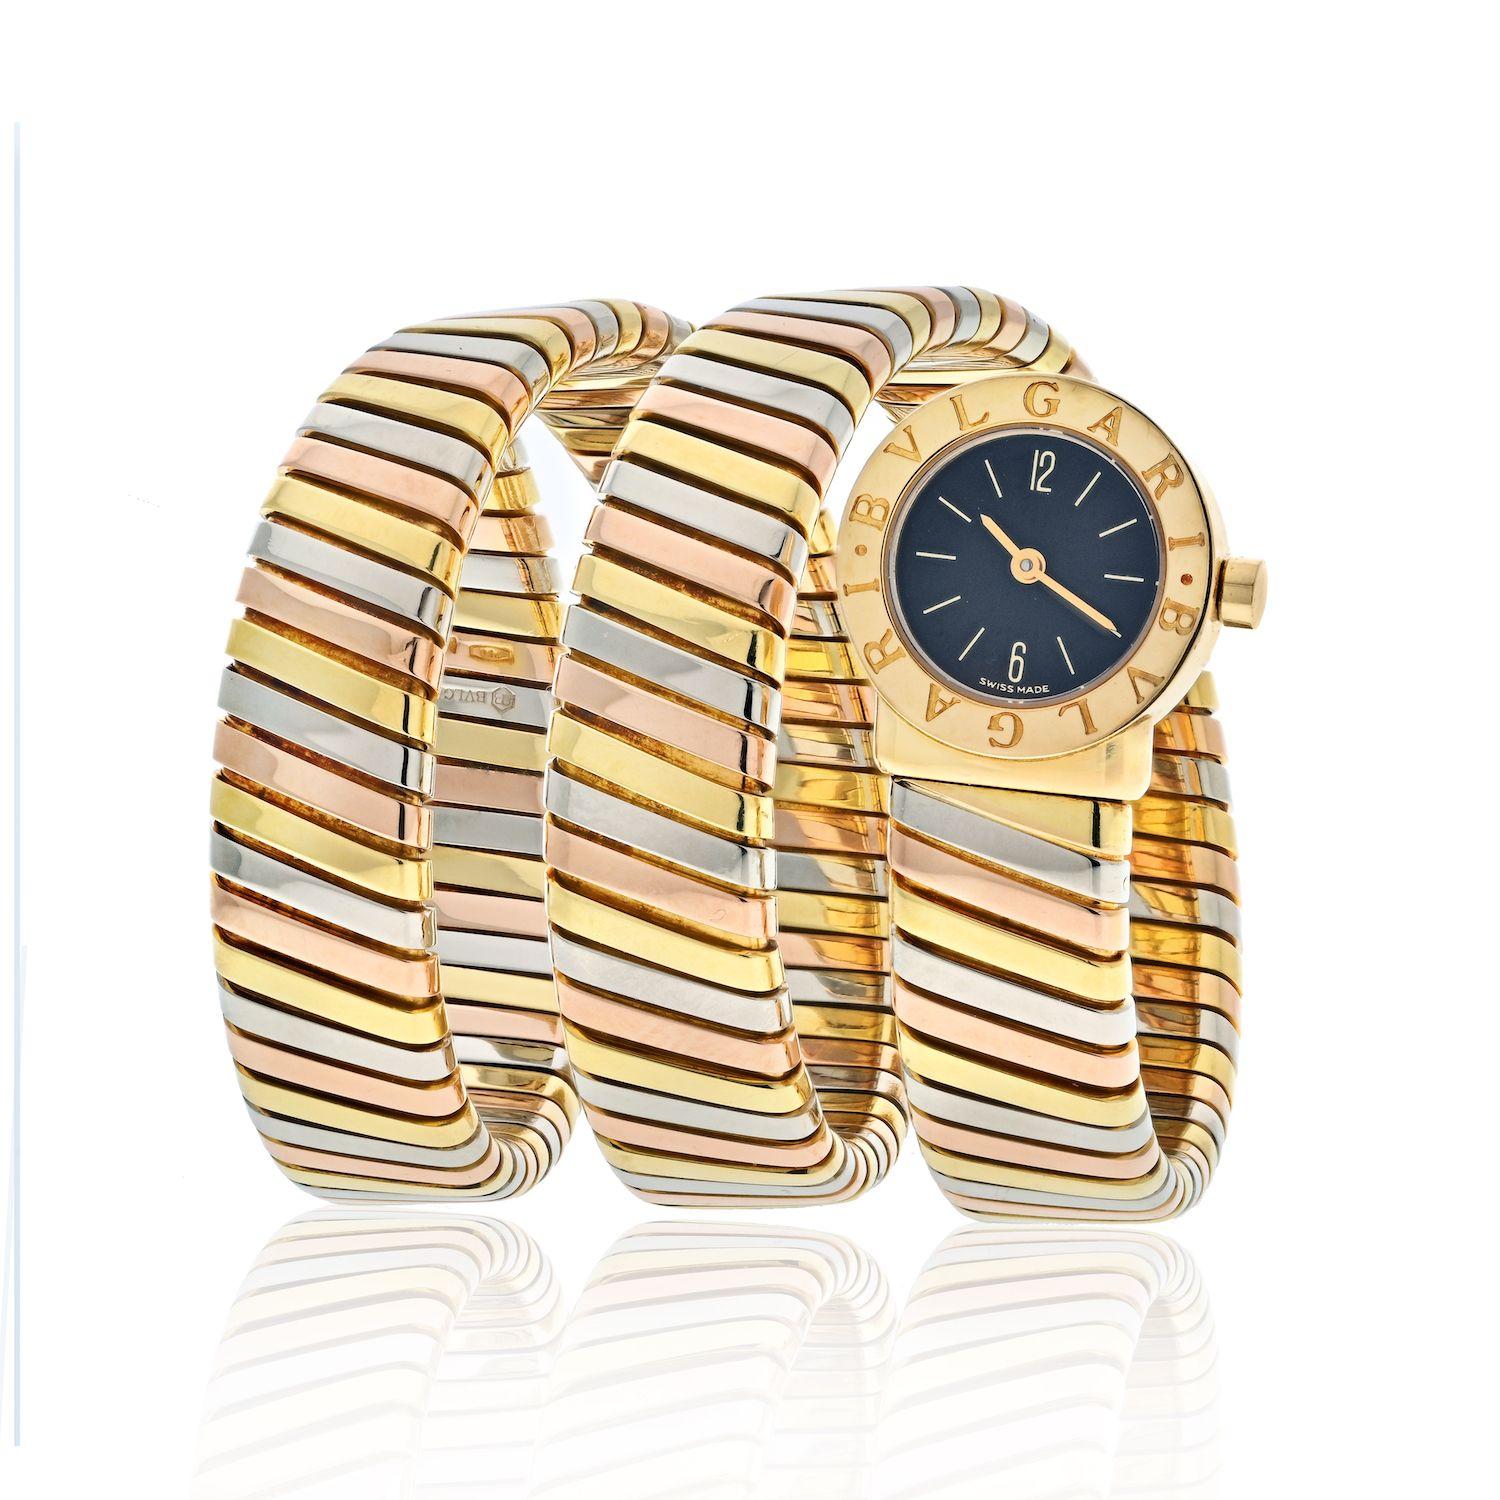 Bvlgari 18K Tri Color BB191T Tricolor Tubogas Watch.

This timepiece has become iconic almost the same time it came out. Now after so many years later the house of Bvlgari is bringing this particular model back. Extremely hard to come by in the